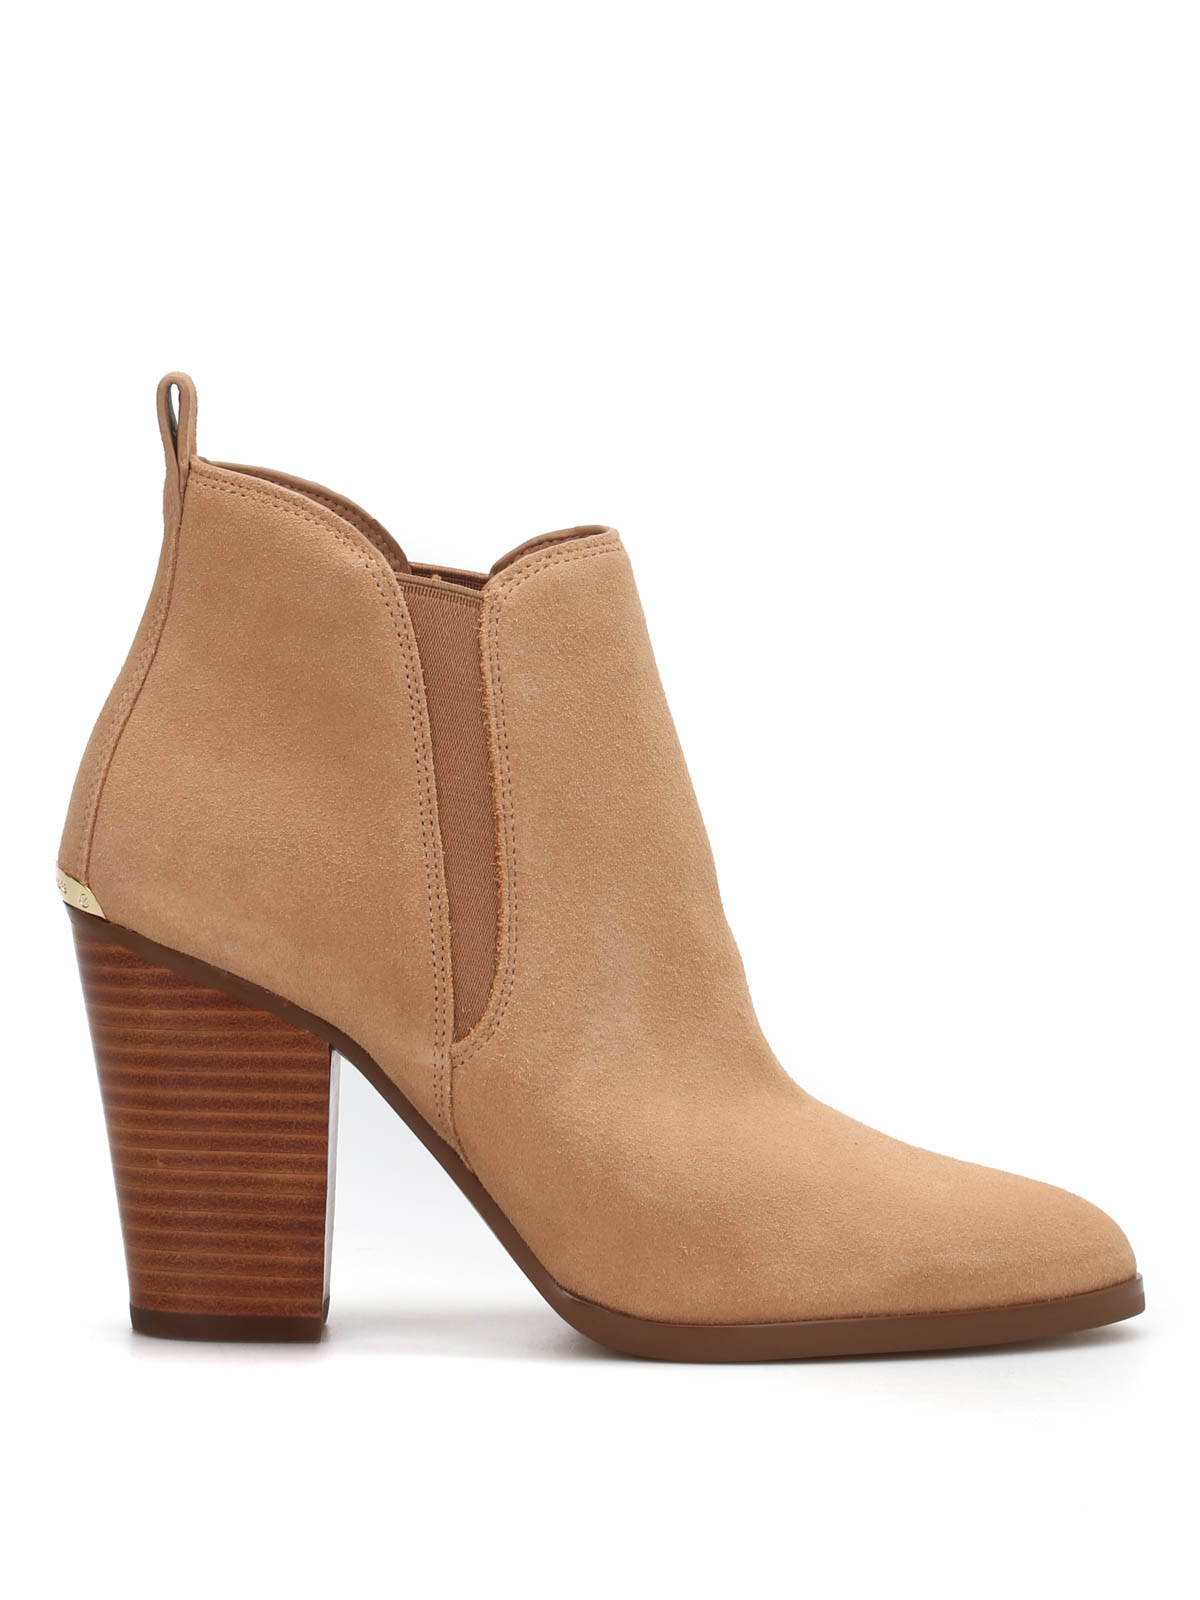 Ankle boots Michael Kors - Brandy suede bootie - 40F4BDHE5S254 